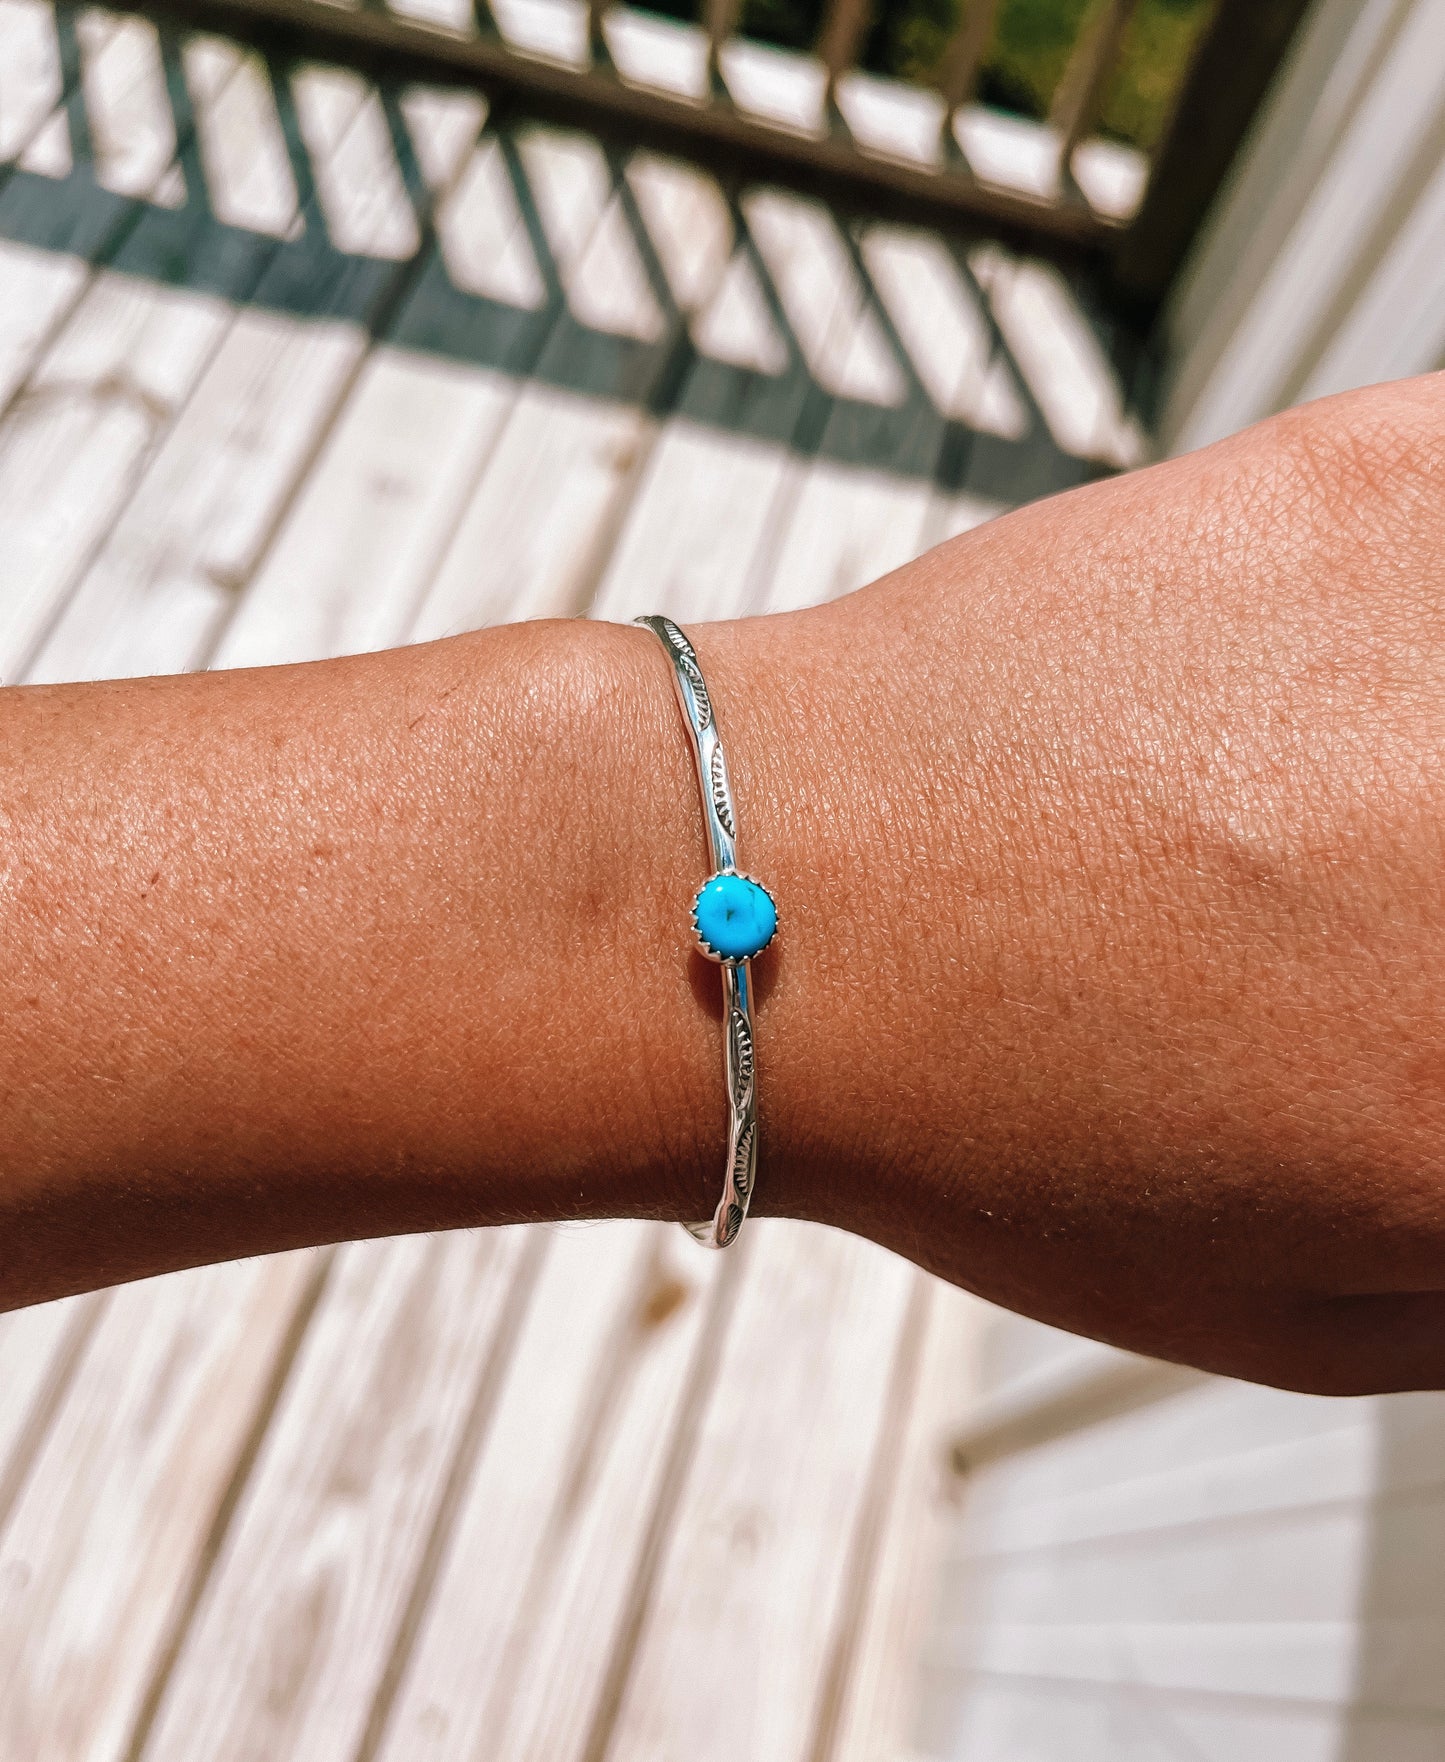 The Authentic Turquoise Bangle